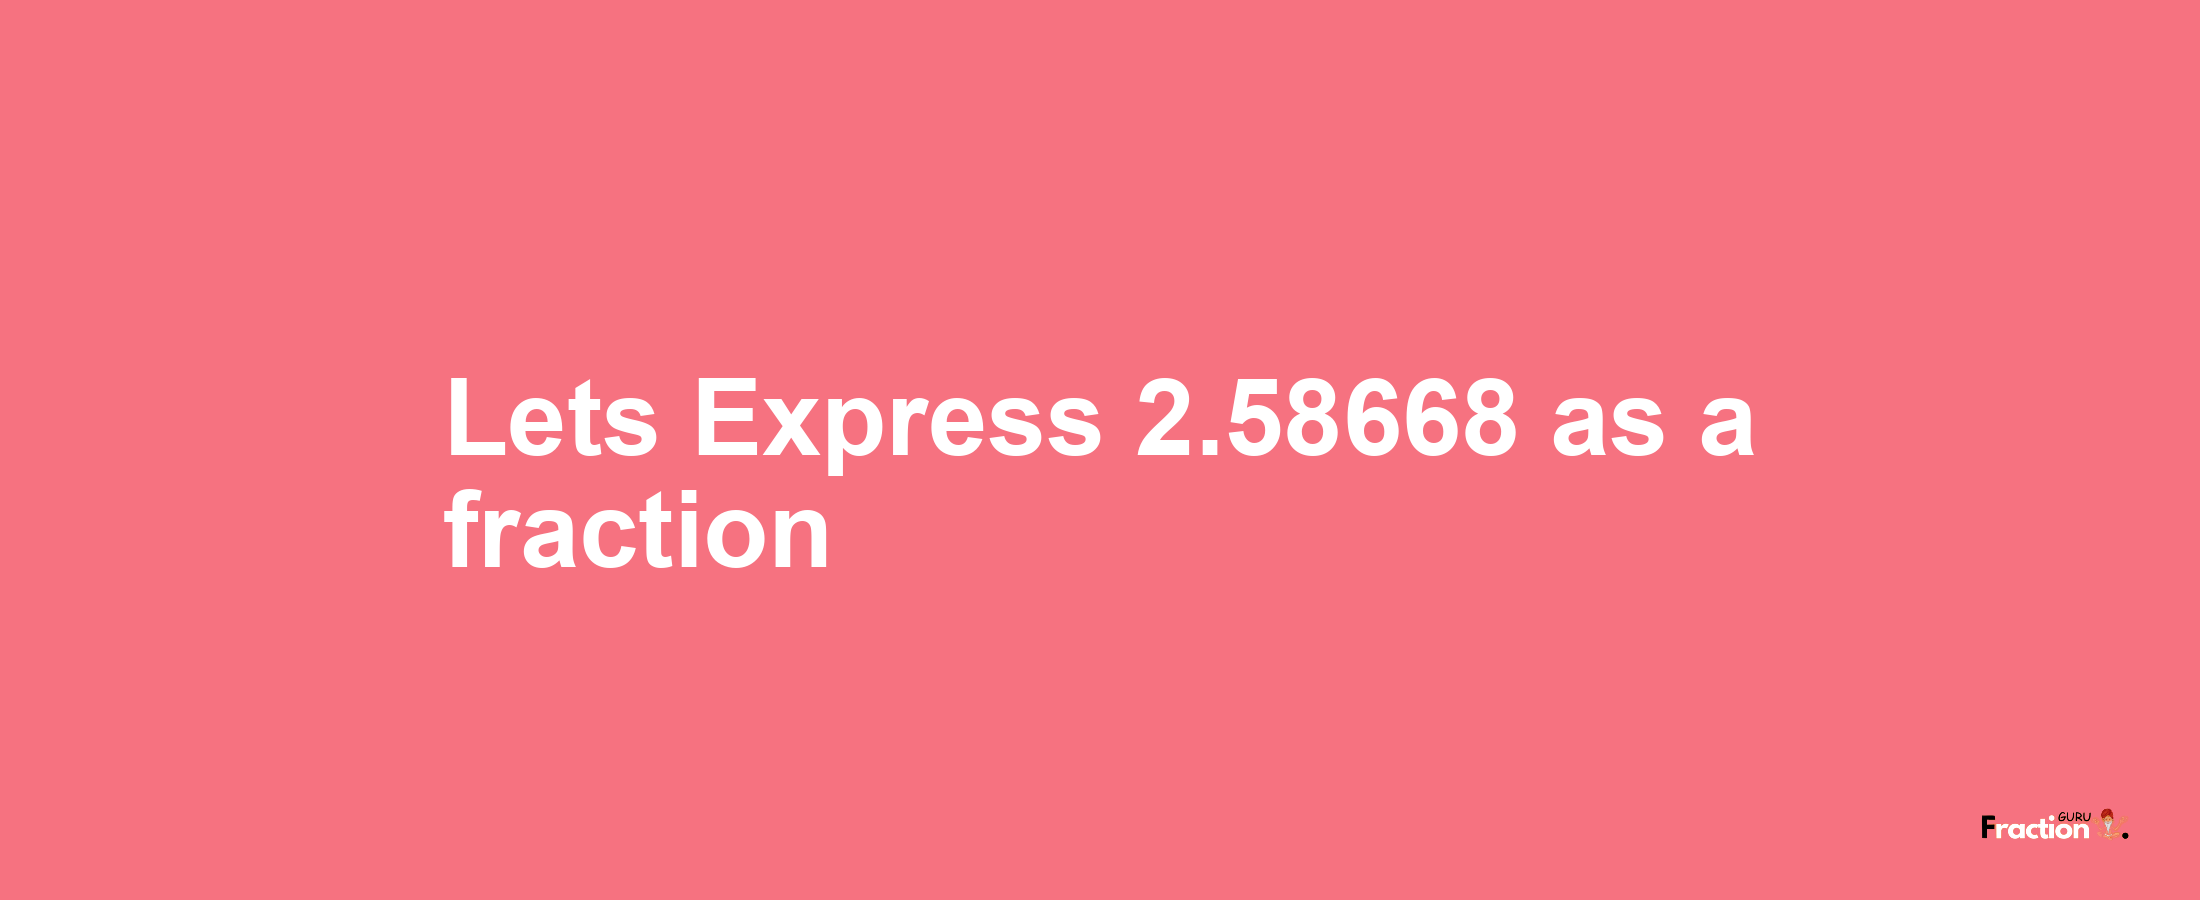 Lets Express 2.58668 as afraction